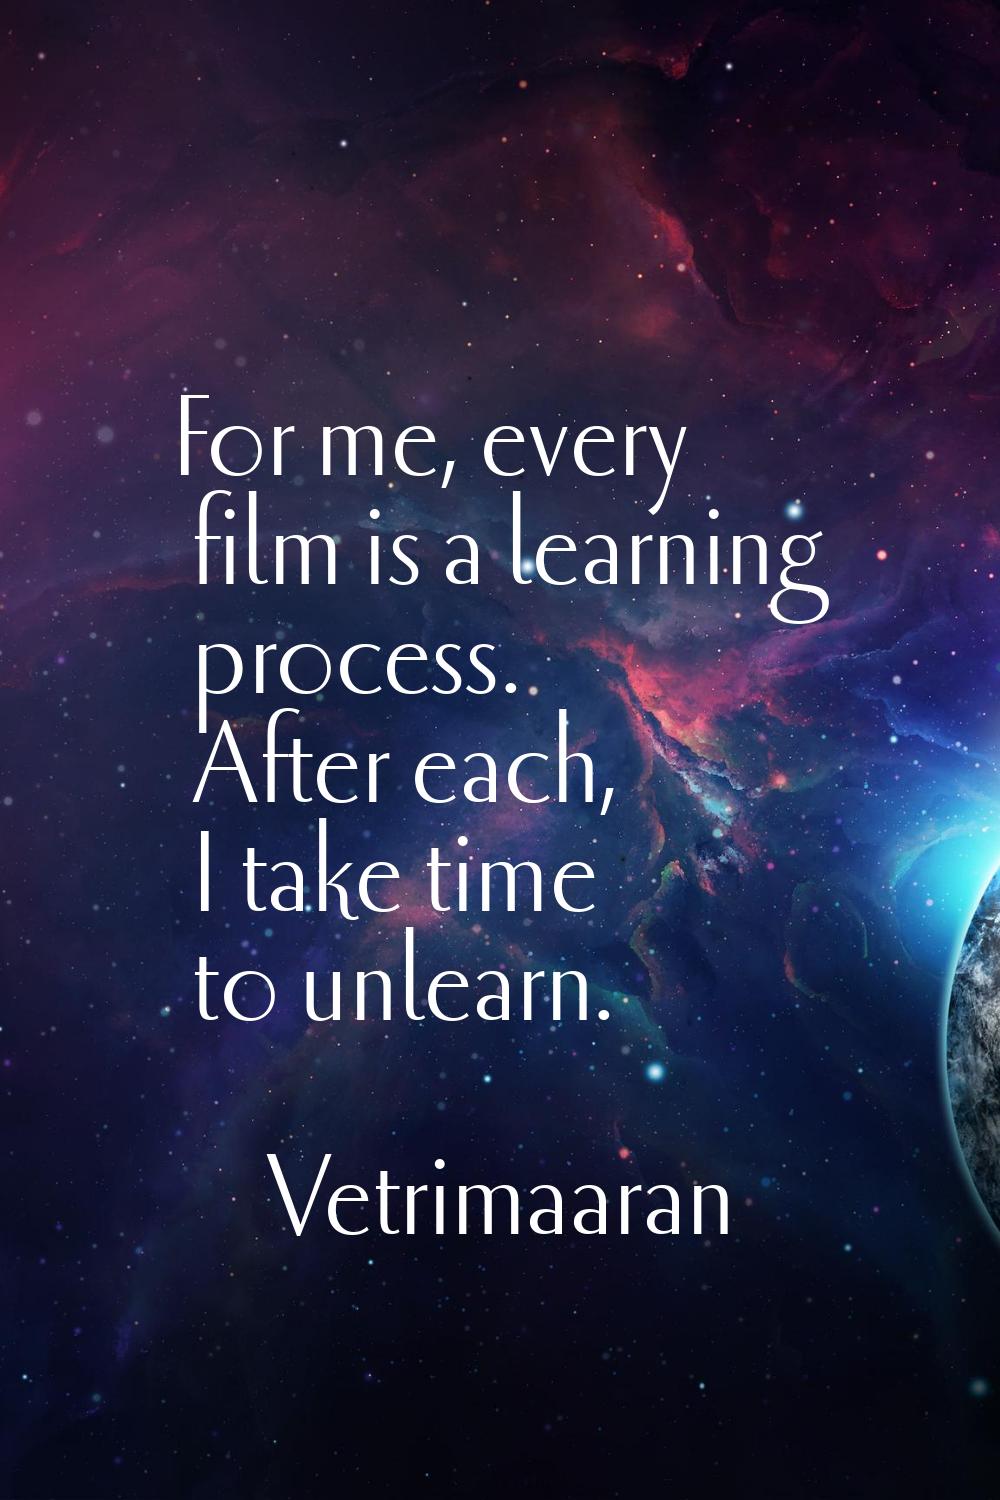 For me, every film is a learning process. After each, I take time to unlearn.